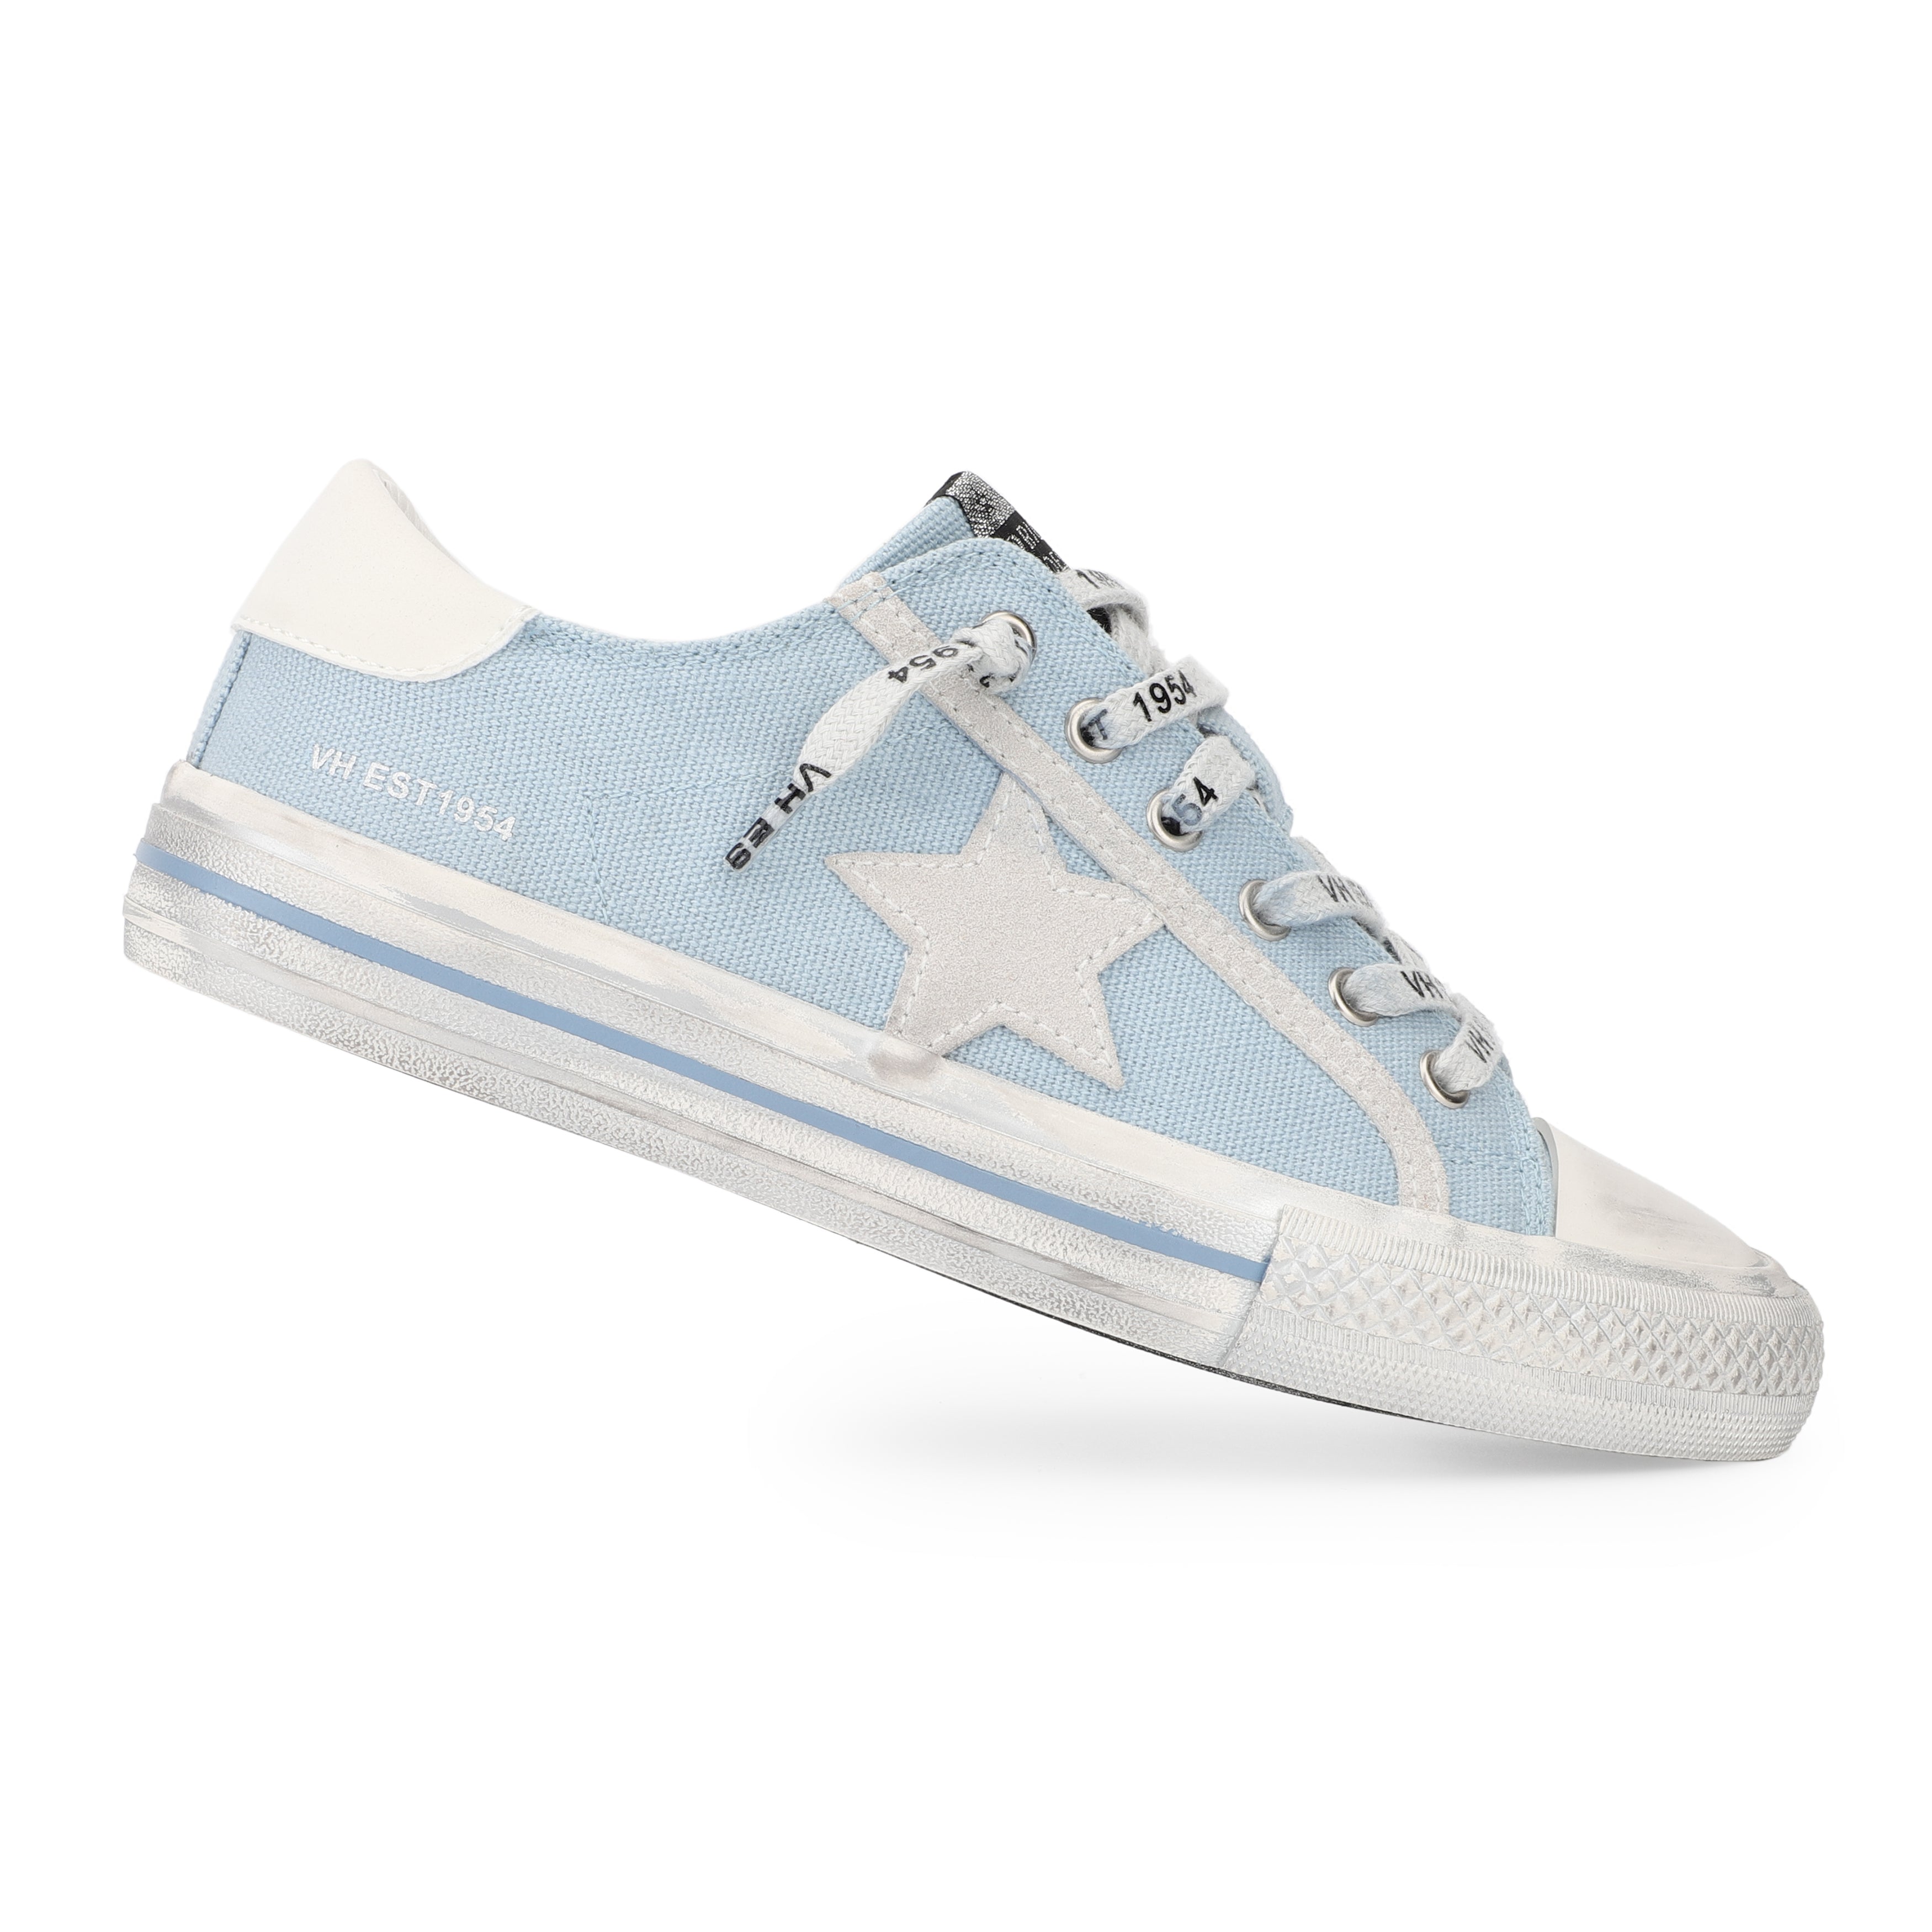 VINTAGE HAVANA - ALIVE Lace Up Sneakers Casual Shoes - SKY